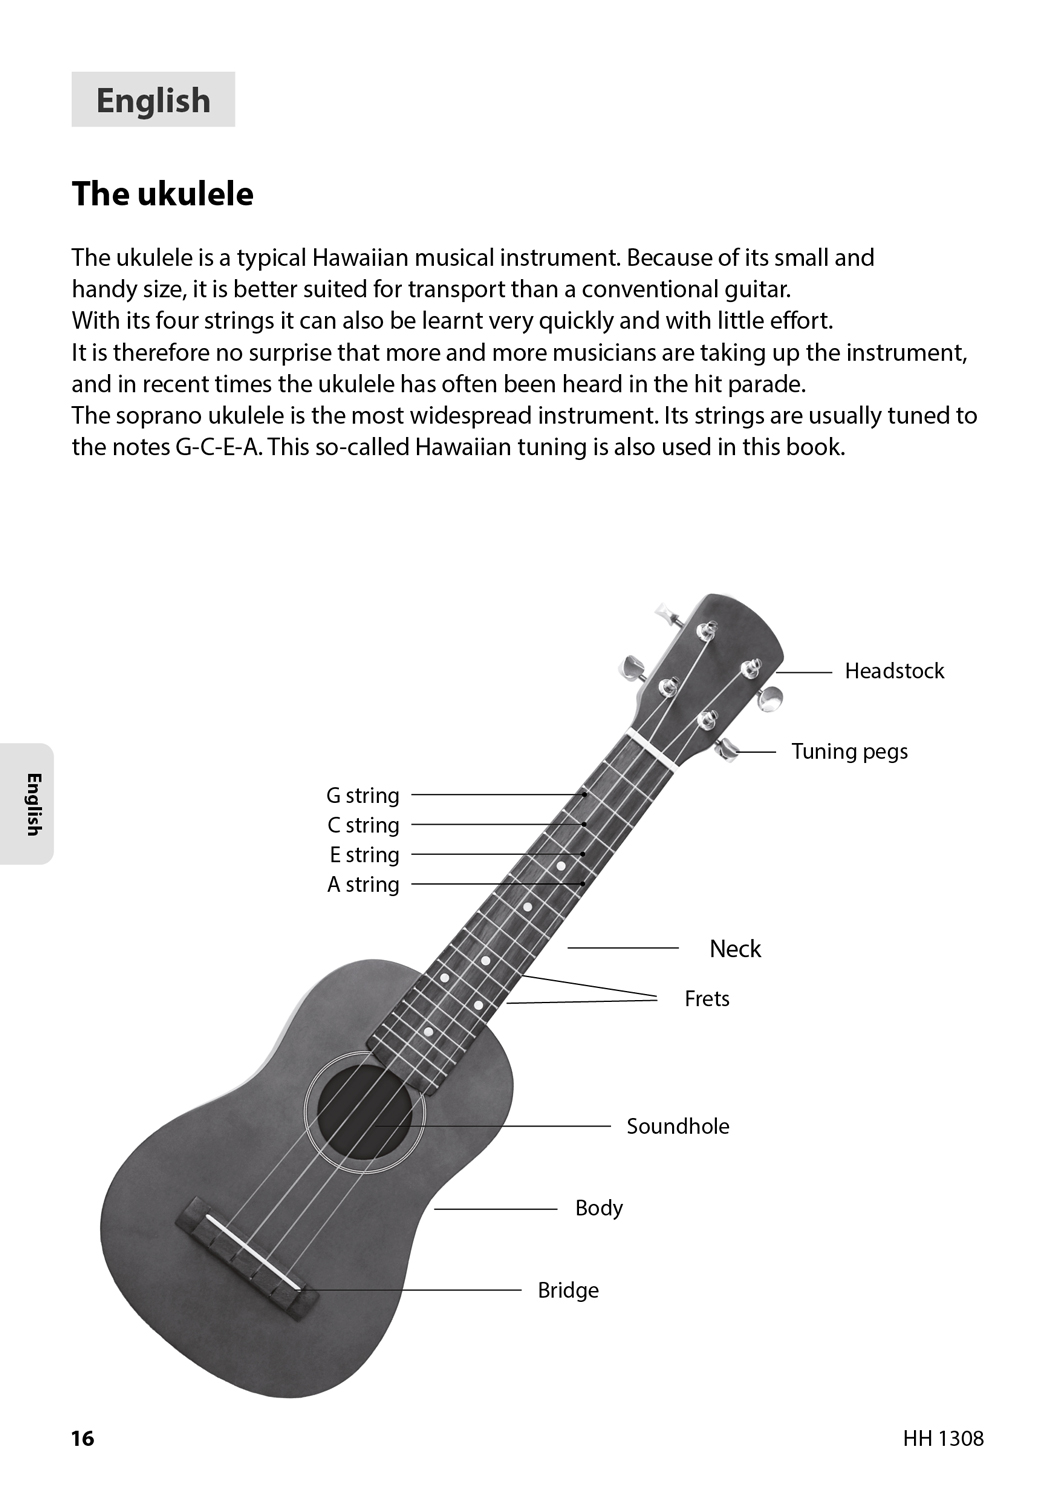 Ukulele - Learn to play quick and easy, 4 languages Product Photos 5